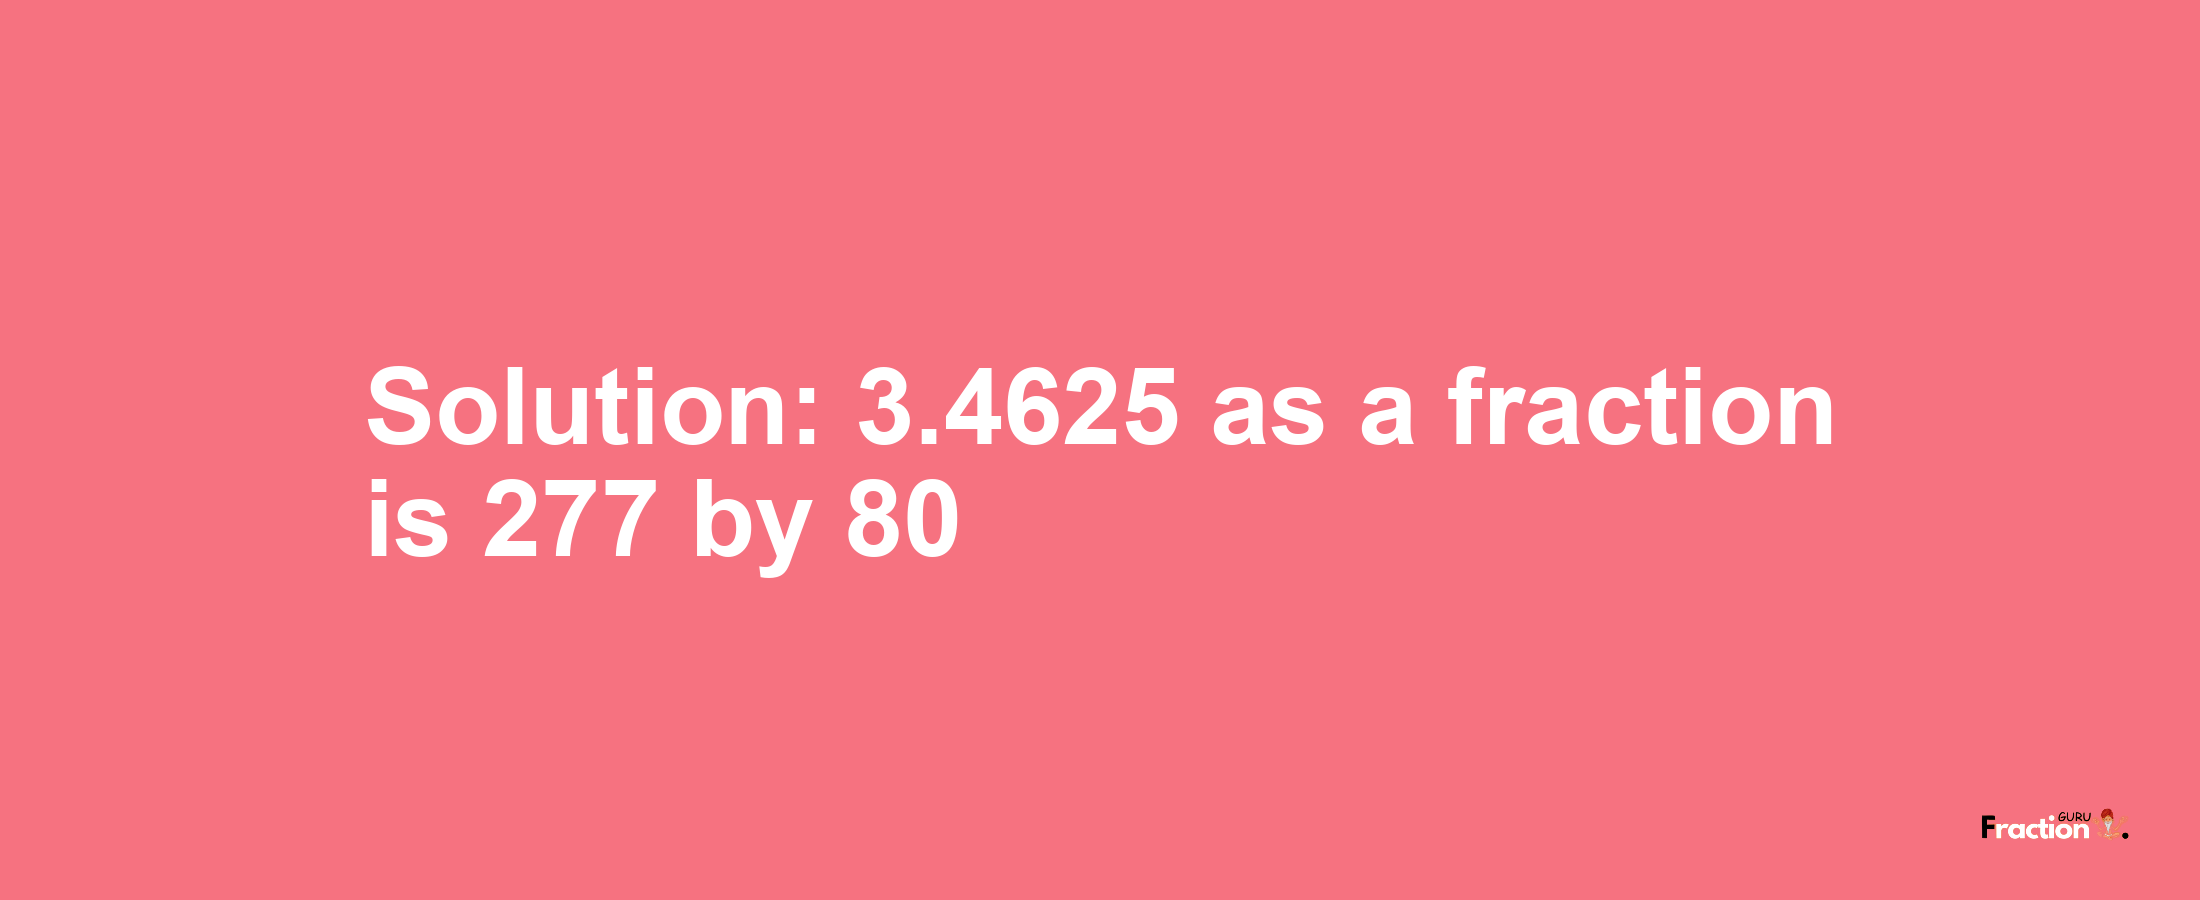 Solution:3.4625 as a fraction is 277/80